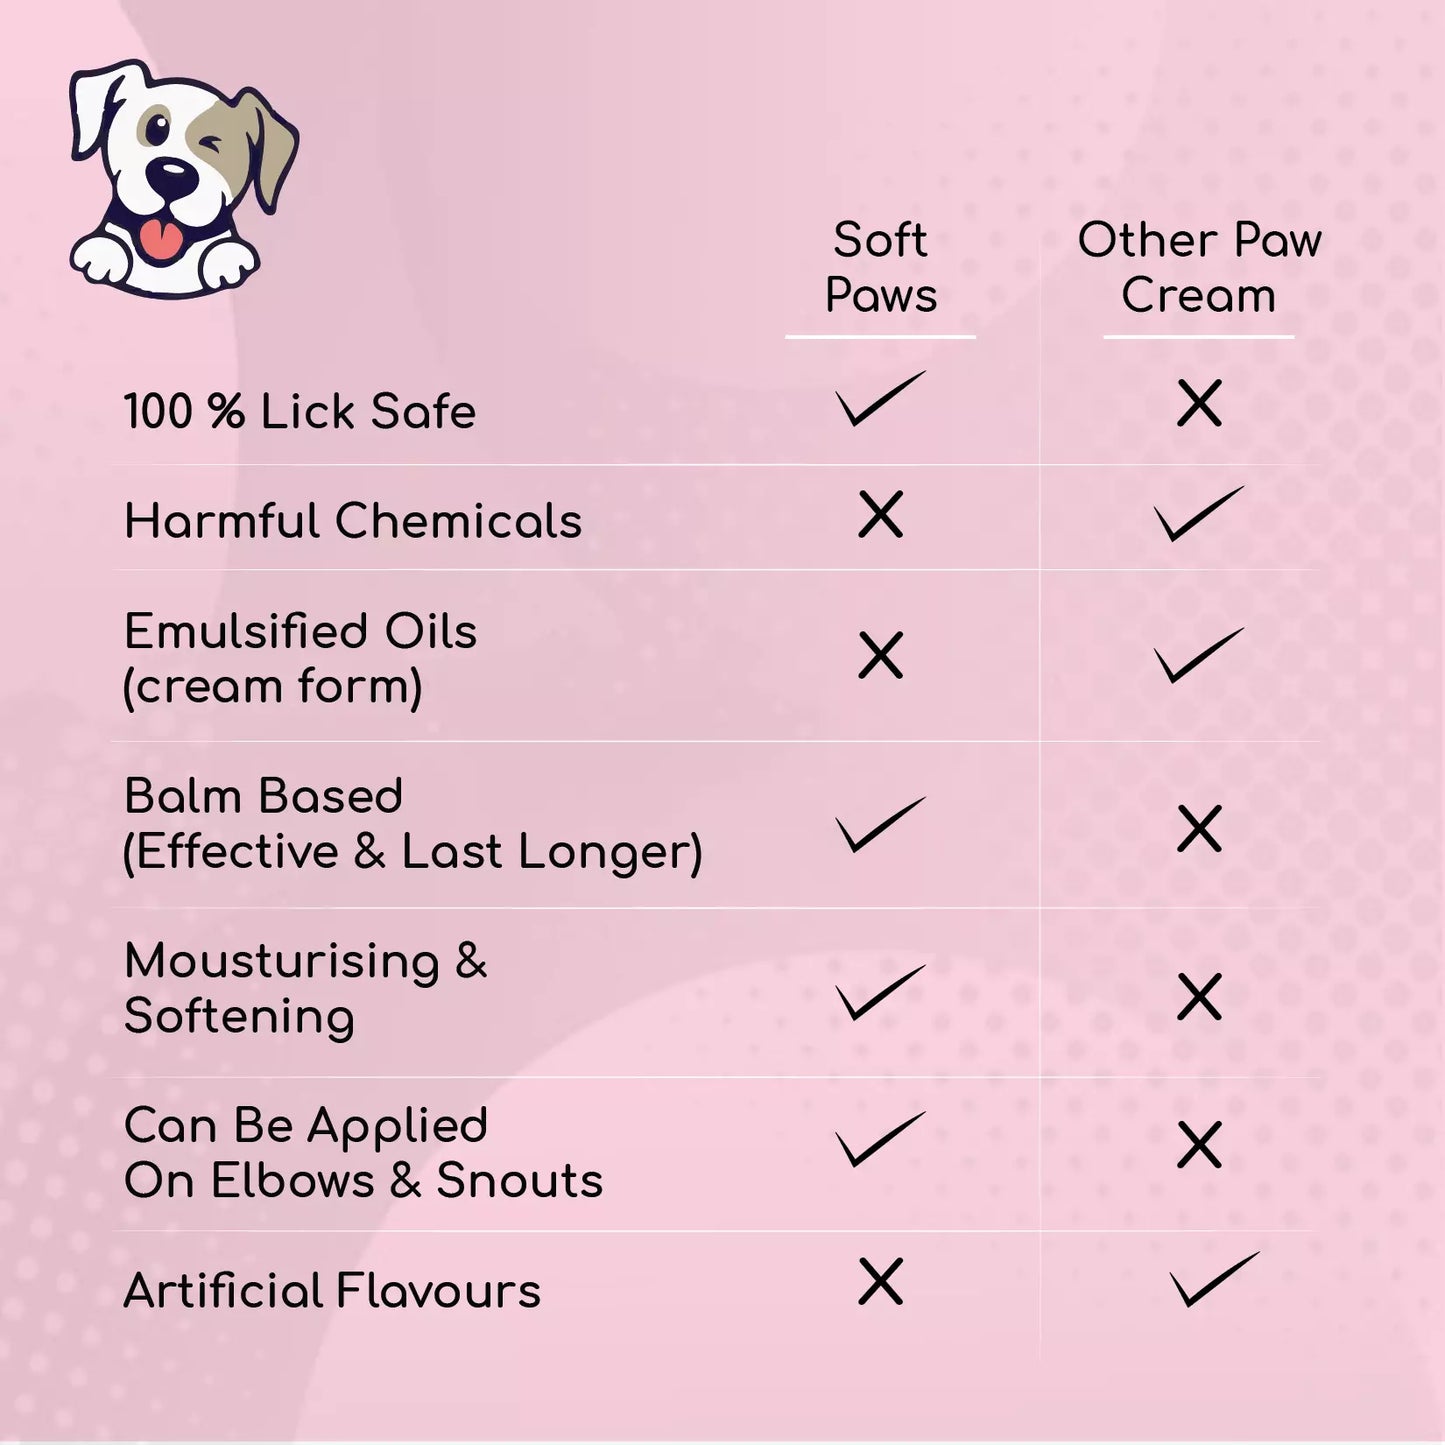 Differentiation: Our Paw Cream vs. Competitor - 100% Lick-Safe, No Harmful Chemicals, Long-Lasting, Moisturizing, Safe for Elbows and Snouts